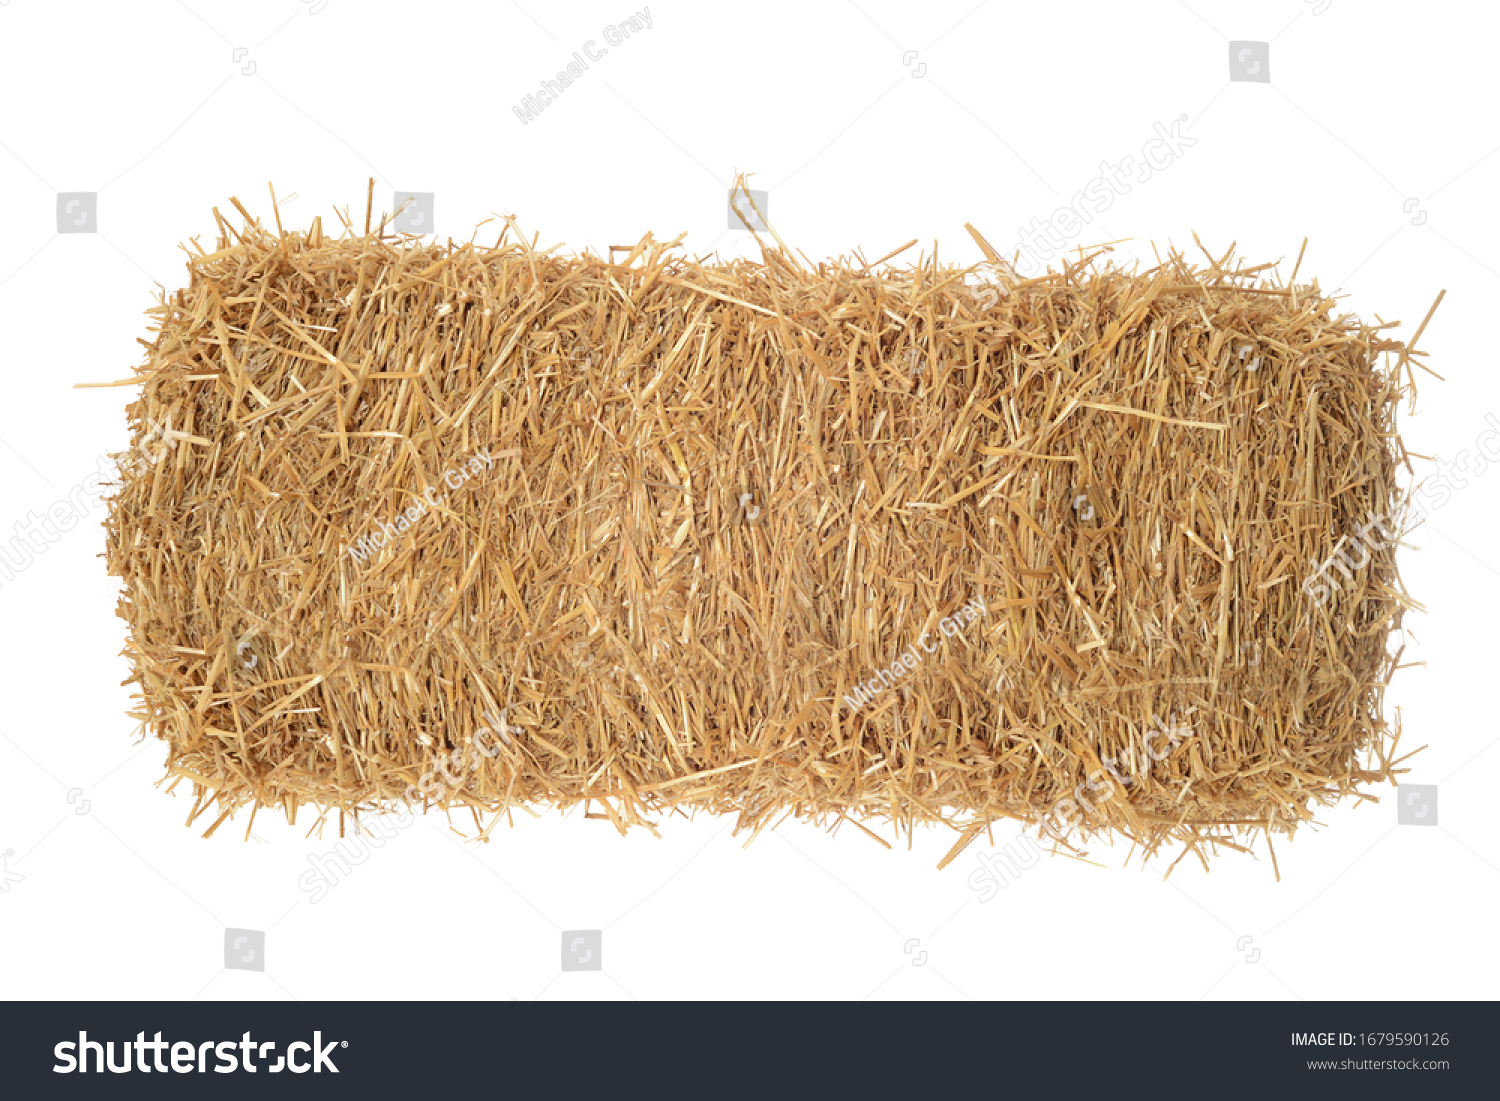 isolated bale of hay on white #1679590126